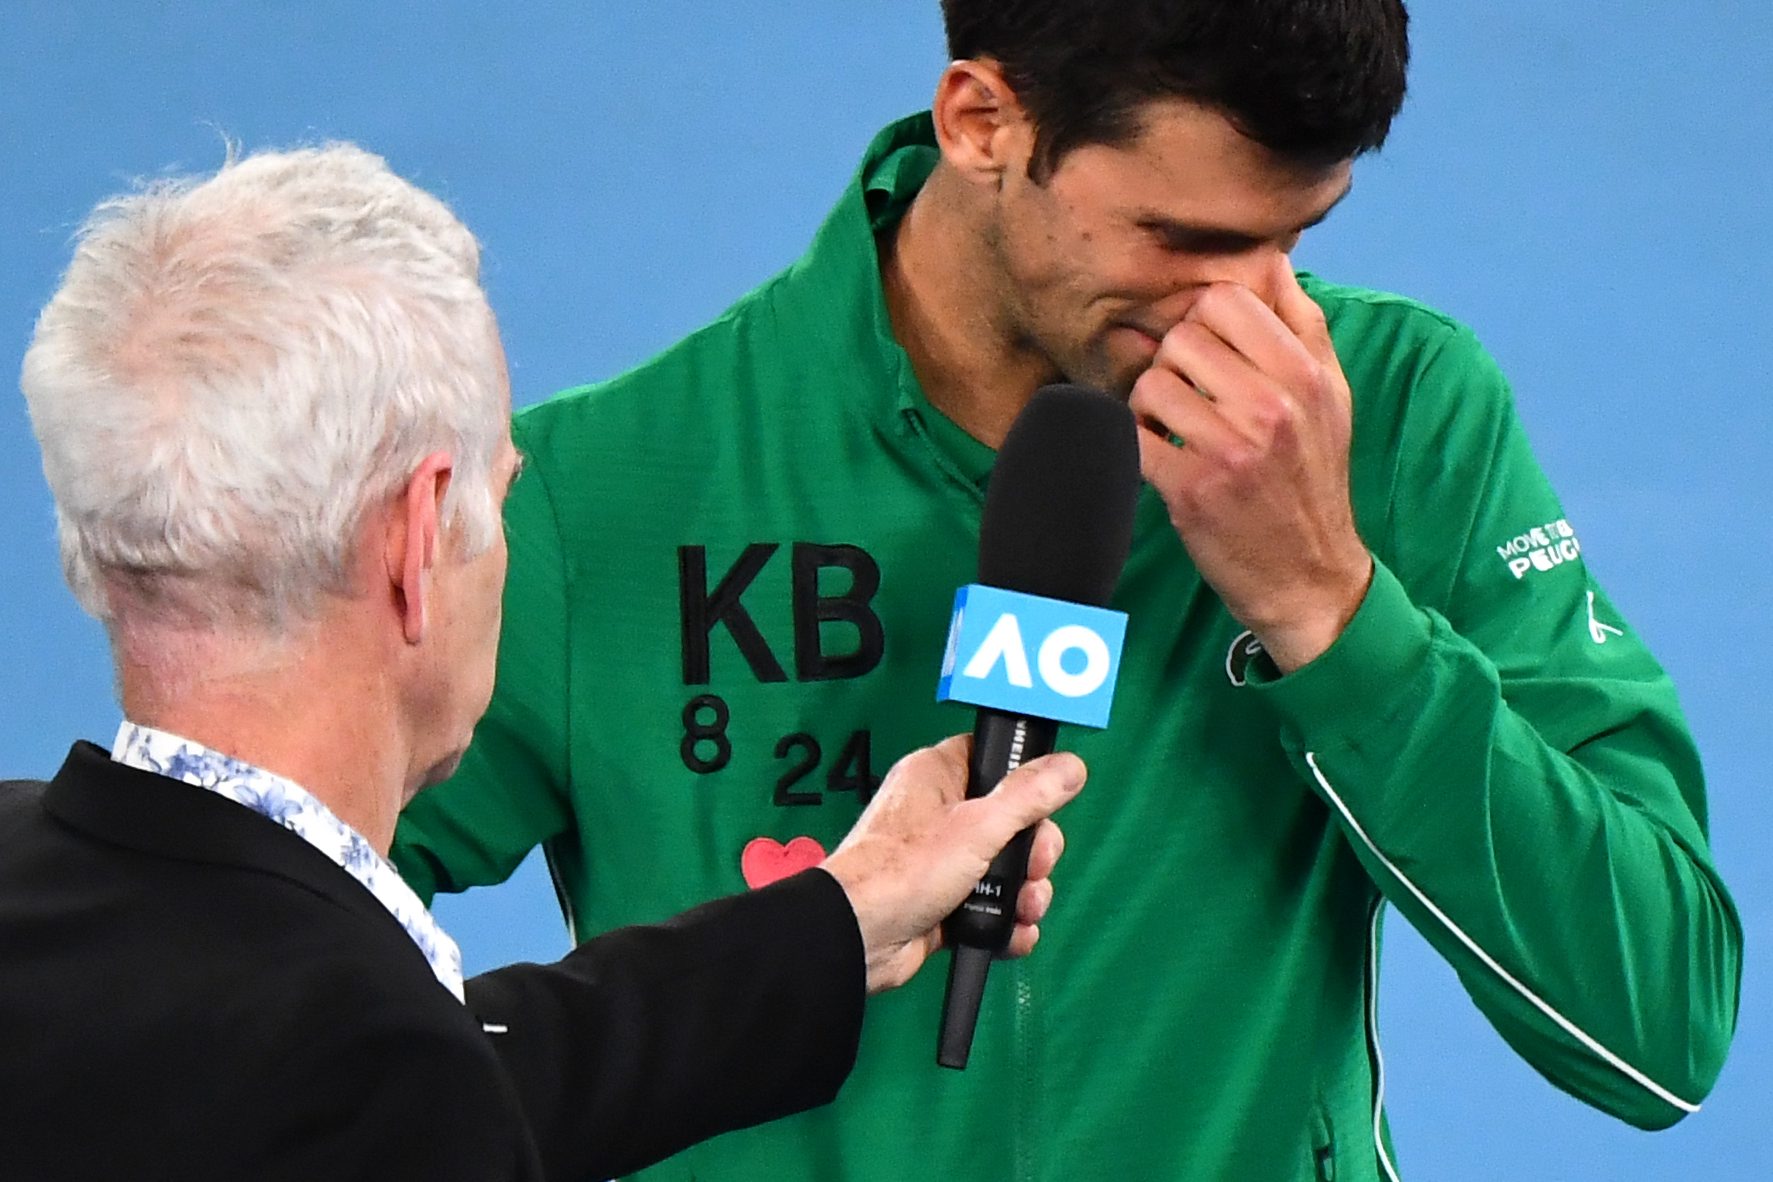 Serbia's Novak Djokovic gets emotional as he talks about Kobe Bryant next to former US tennis player John McEnroe after winning the men's singles quarter-final match against Canada's Milos Raonic on day nine of the Australian Open tennis tournament in Melbourne on January 28, 2020. (Photo by William WEST / AFP) / IMAGE RESTRICTED TO EDITORIAL USE - STRICTLY NO COMMERCIAL USE